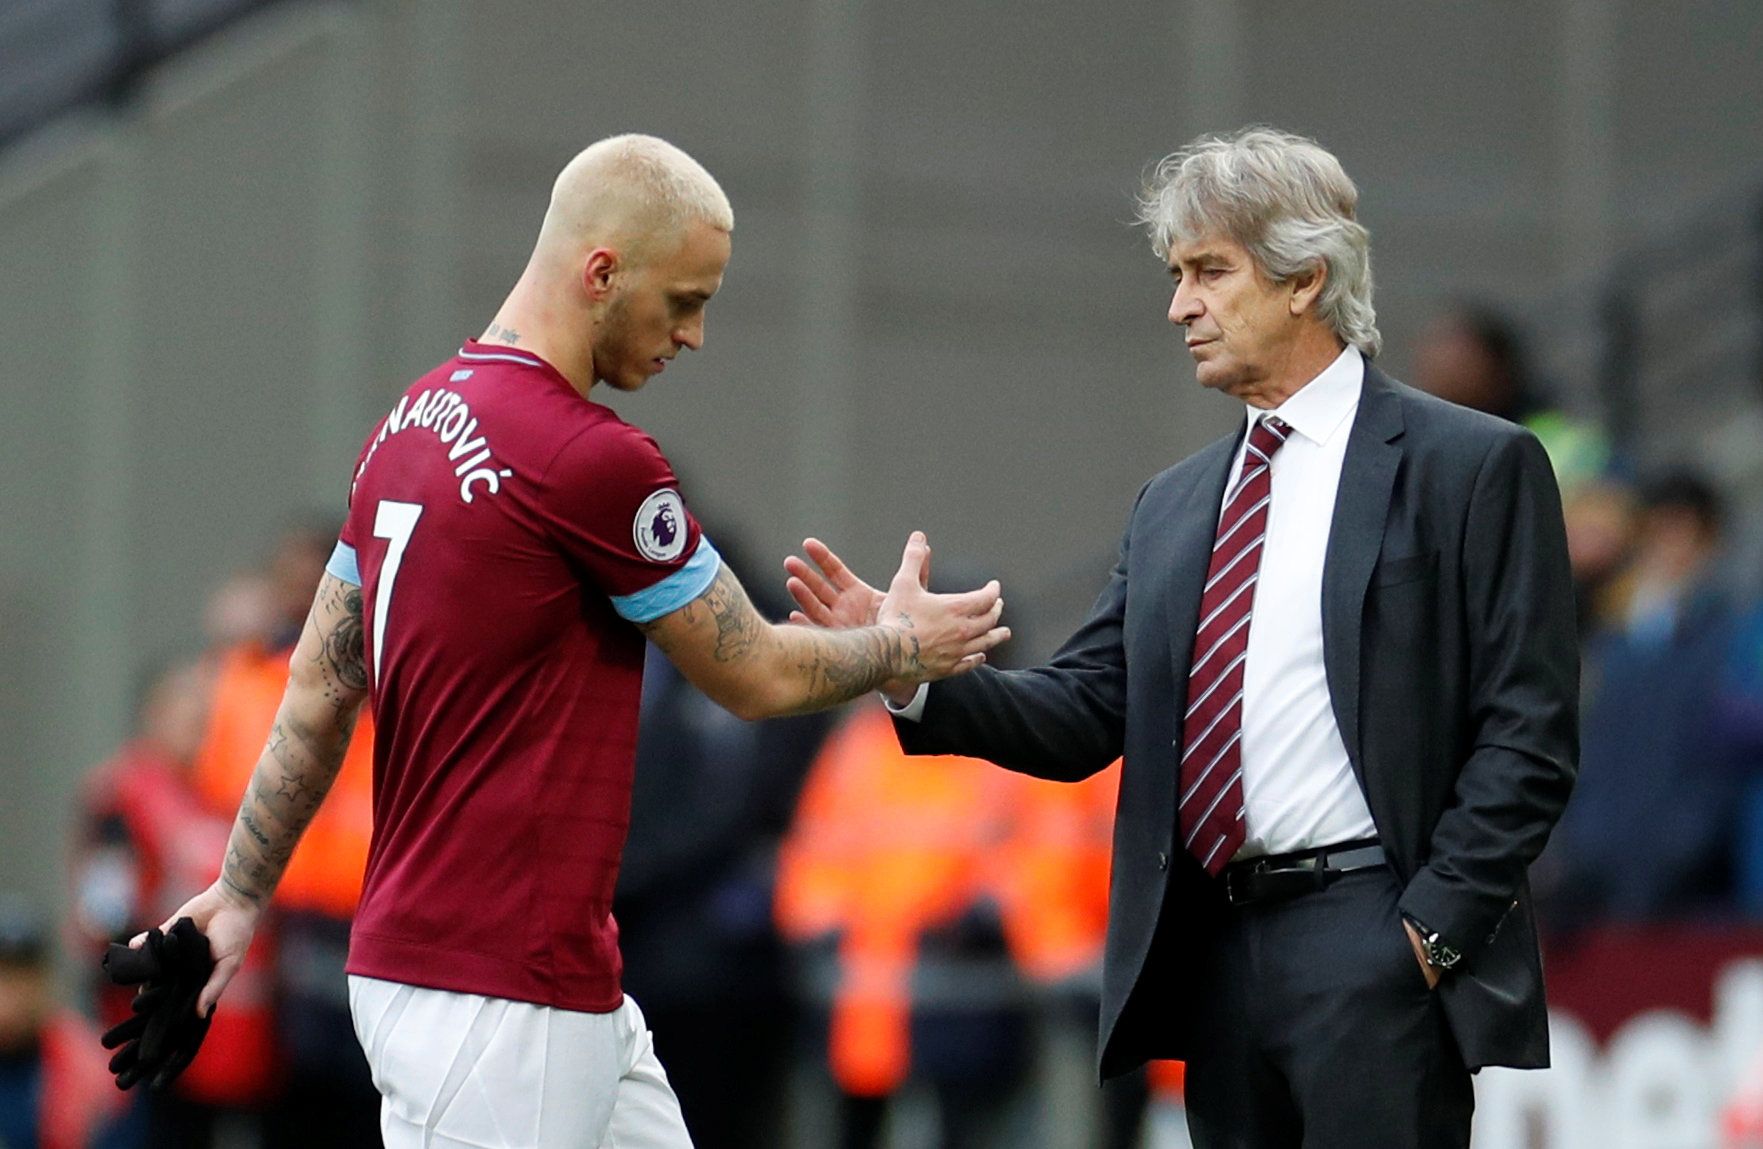 Soccer Football - Premier League - West Ham United v Arsenal - London Stadium, London, Britain - January 12, 2019  West Ham's Marko Arnautovic is substituted and shakes hands with manager Manuel Pellegrini            Action Images via Reuters/John Sibley  EDITORIAL USE ONLY. No use with unauthorized audio, video, data, fixture lists, club/league logos or 